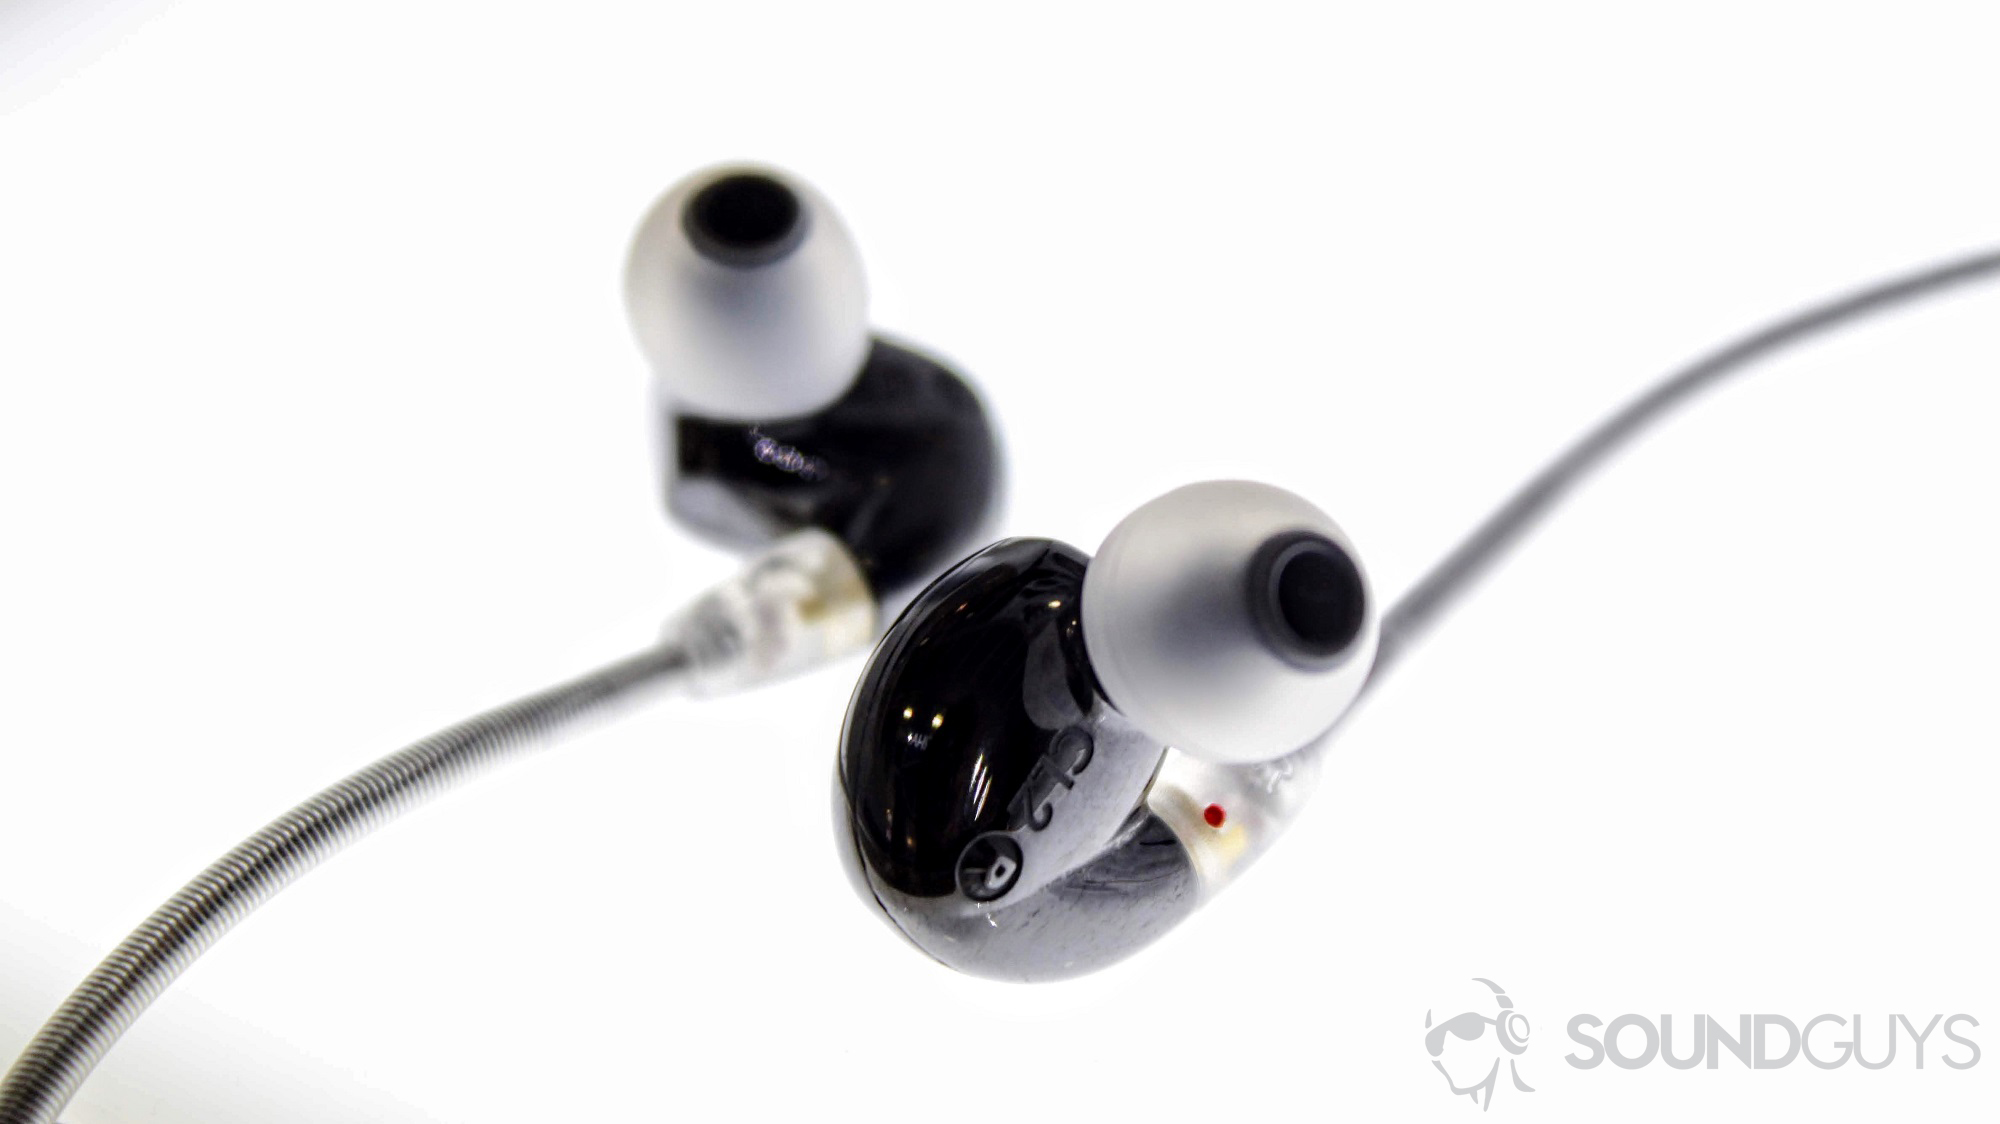 The RHA CL2 Planar headphones on a white background.